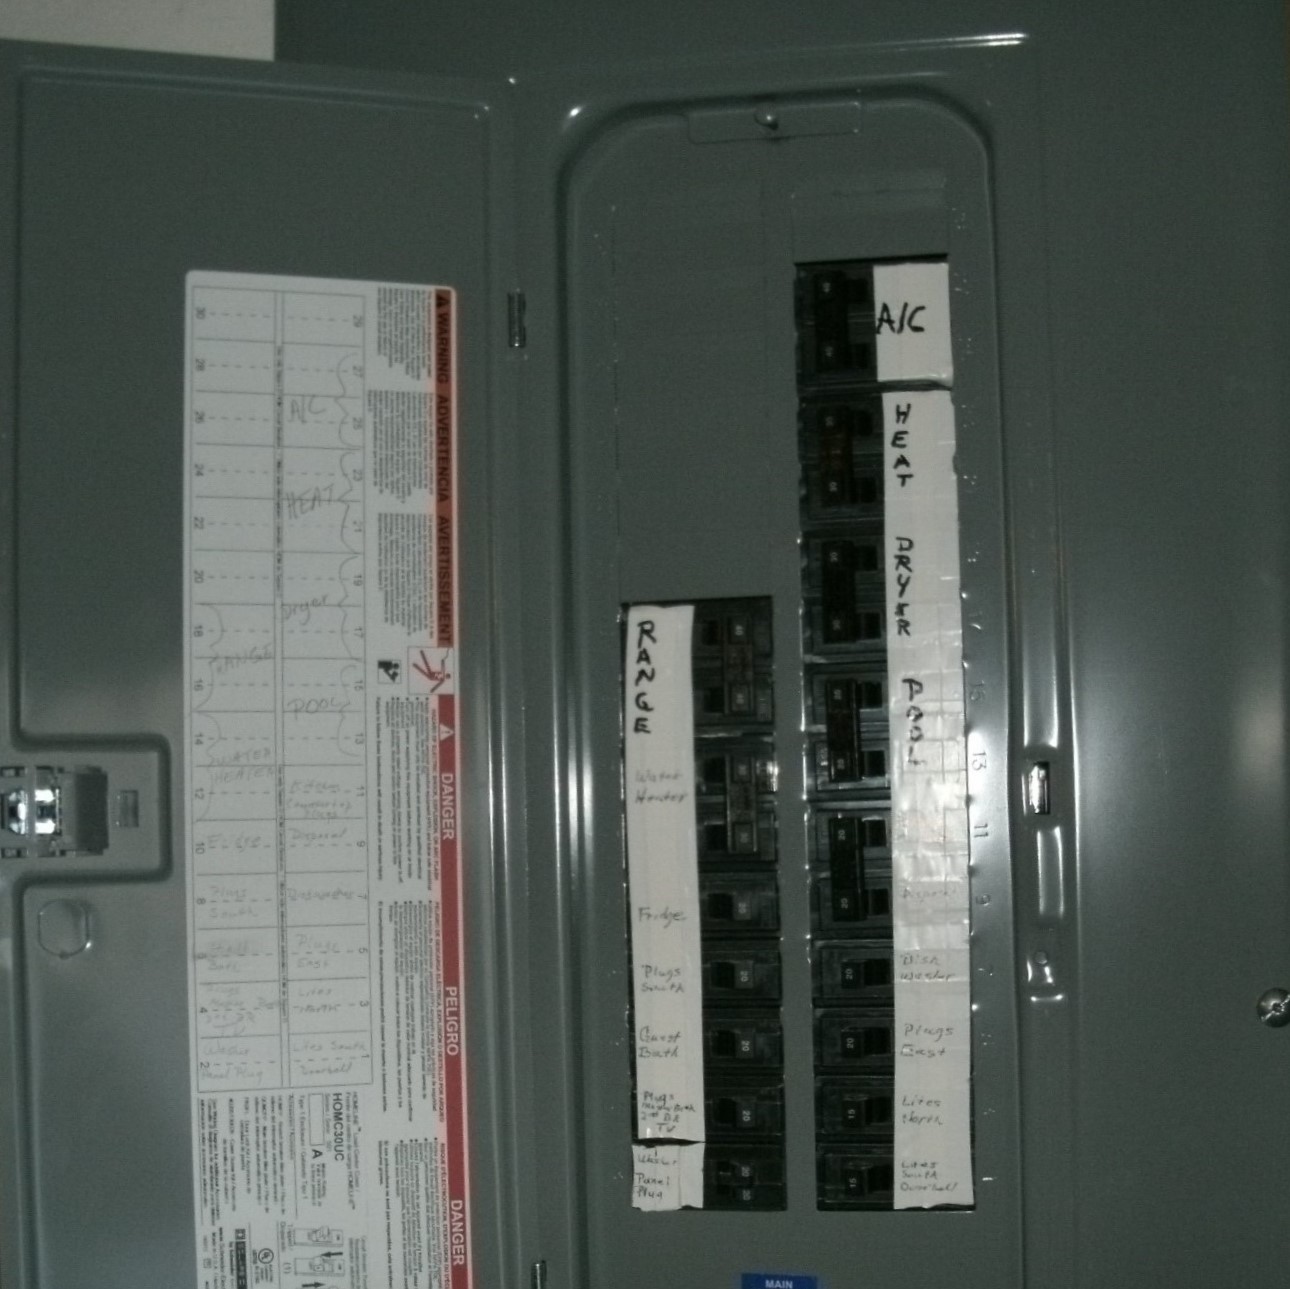 PANEL UPGRADE
Are you thinking of an electrical panel upgrade? This is a really short blog on why some of my customers upgraded their panels.

https://www.montgomeryelec.com/panel-upgrade/